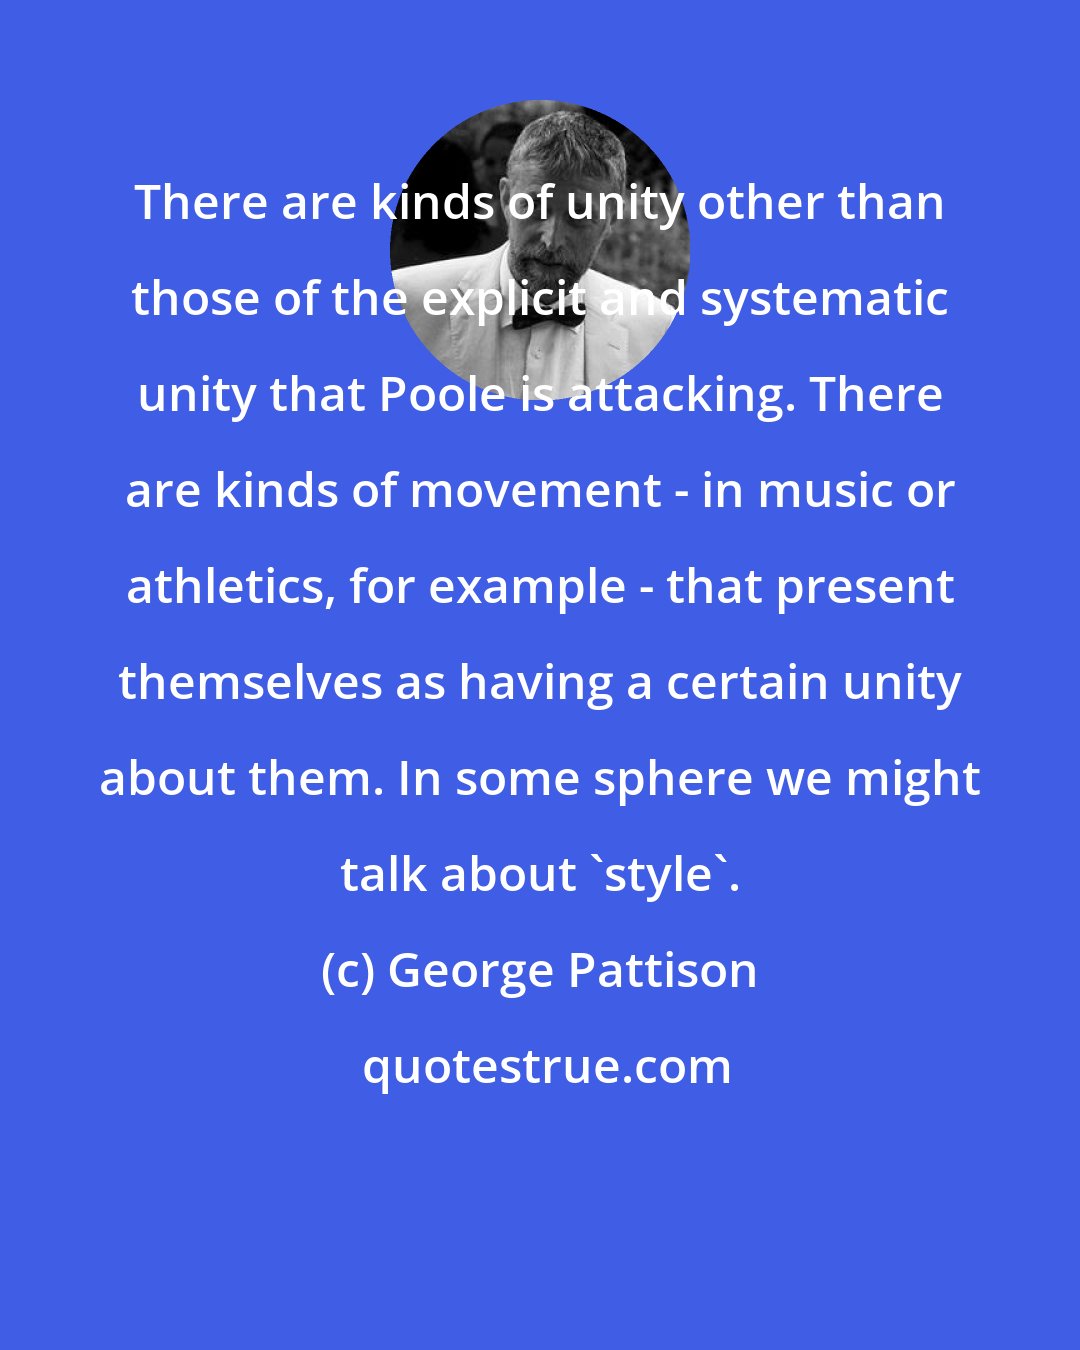 George Pattison: There are kinds of unity other than those of the explicit and systematic unity that Poole is attacking. There are kinds of movement - in music or athletics, for example - that present themselves as having a certain unity about them. In some sphere we might talk about 'style'.